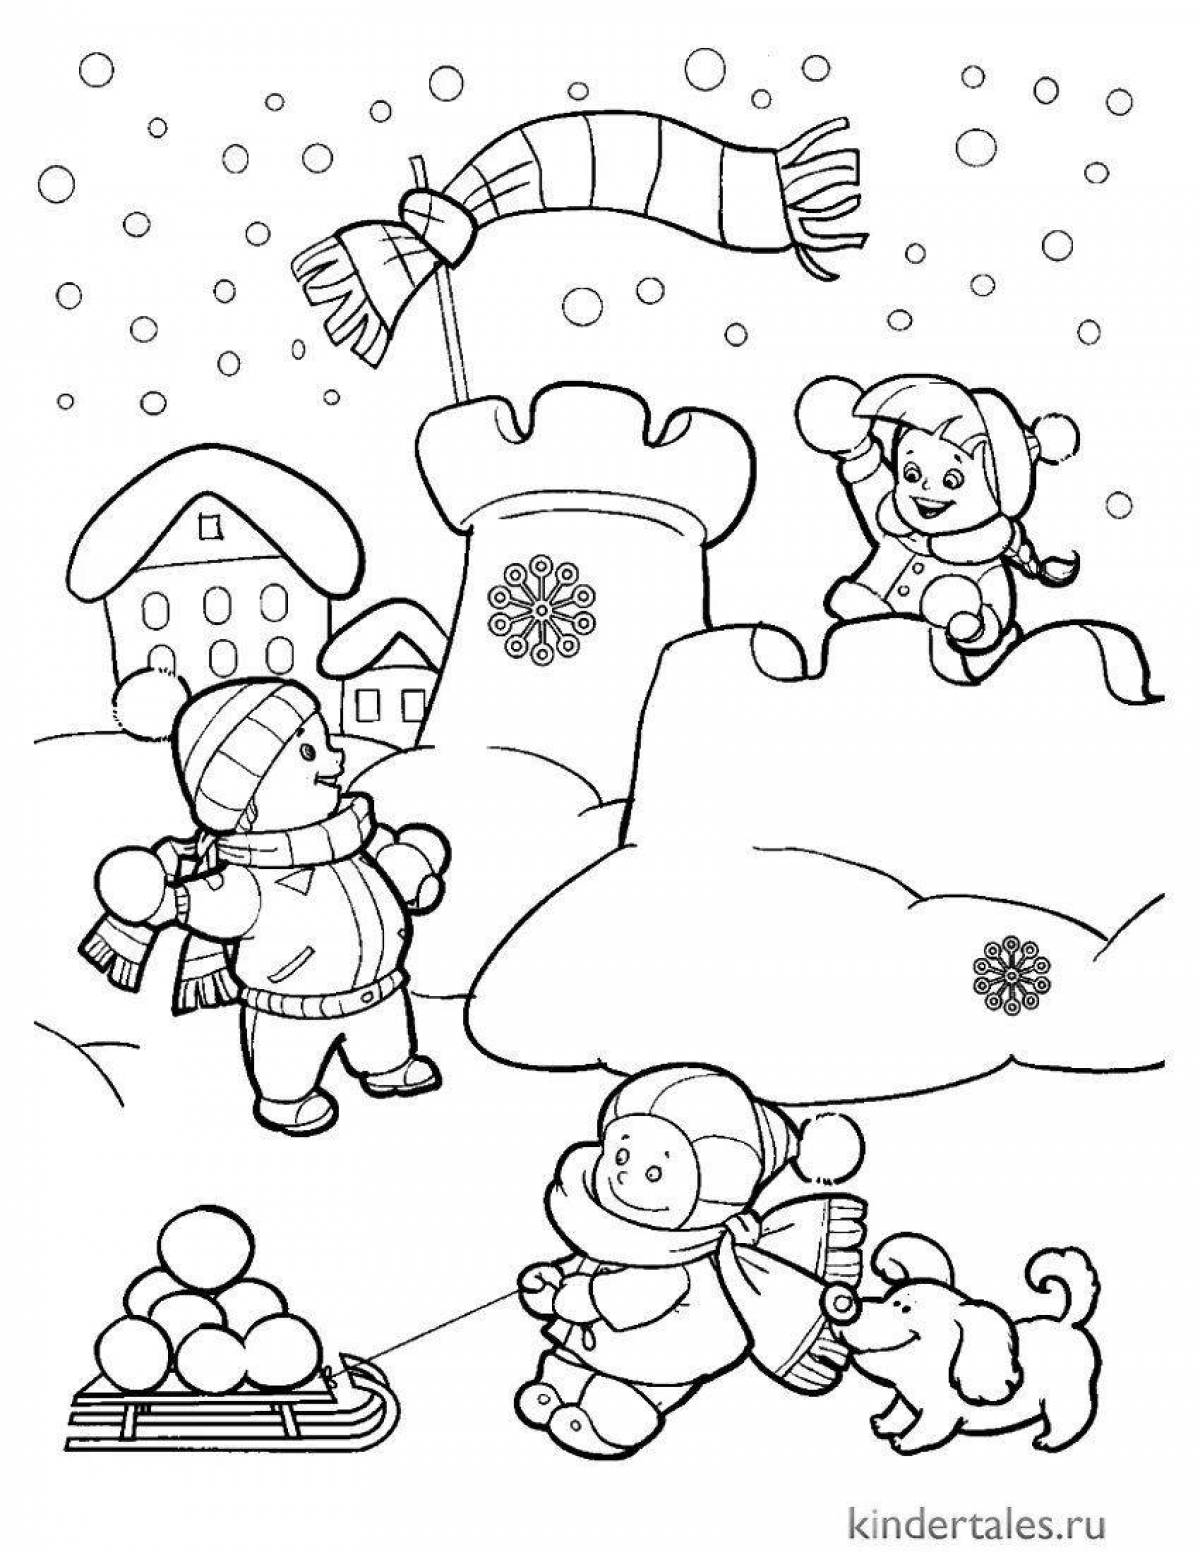 Exquisite winter coloring book for kids 4 5